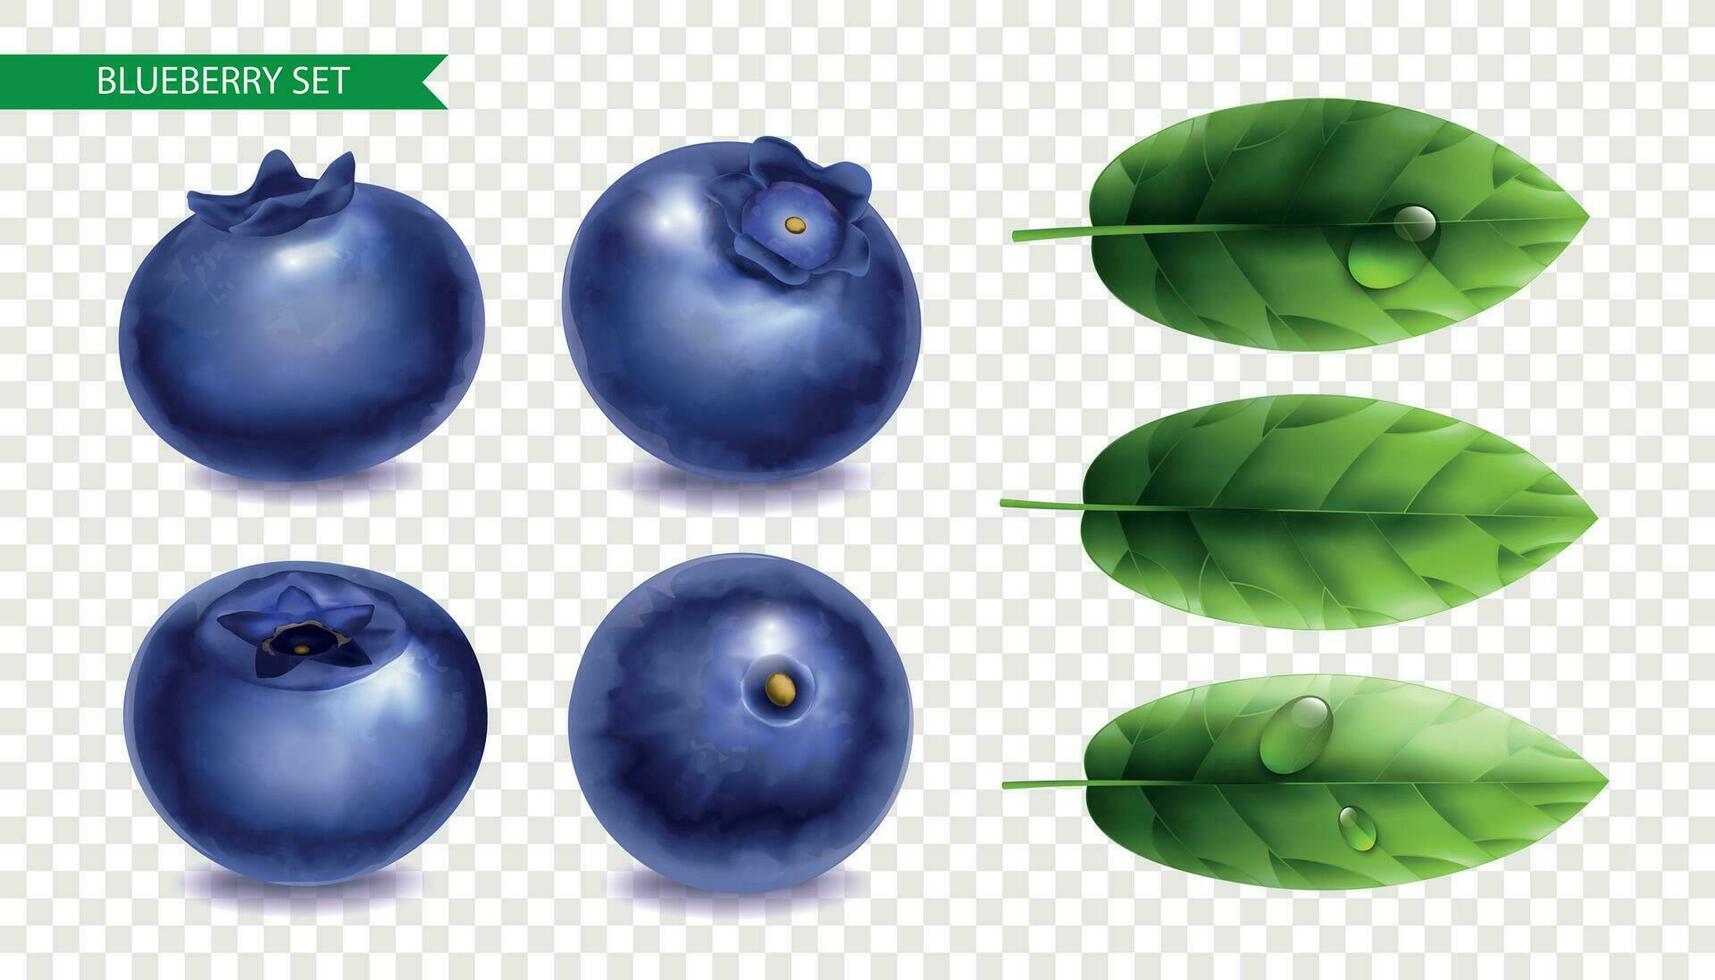 Blueberry Realistic Set vector